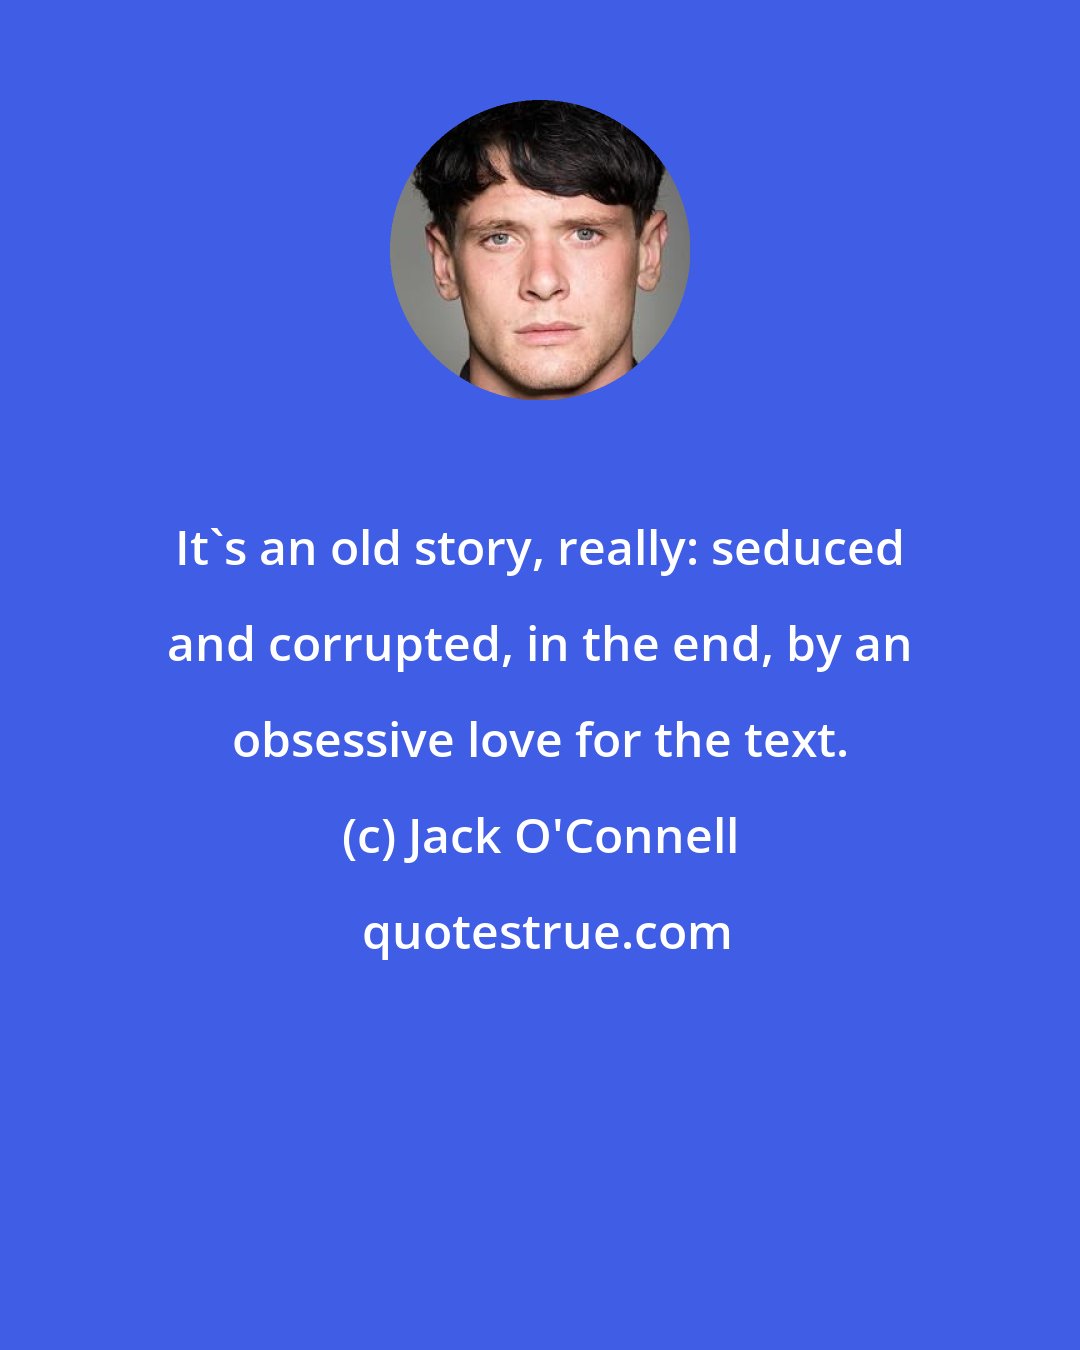 Jack O'Connell: It's an old story, really: seduced and corrupted, in the end, by an obsessive love for the text.